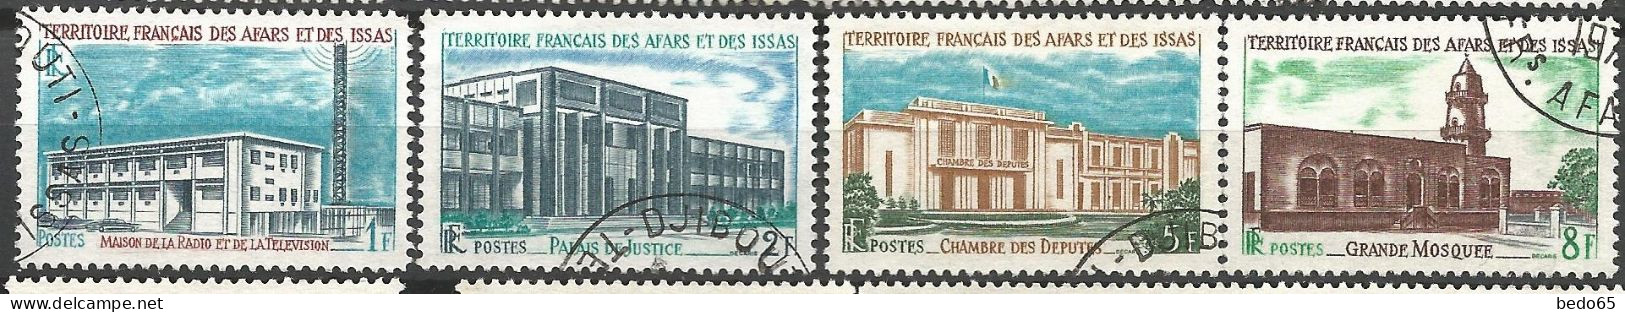 AFARS ET ISSAS N° 343 à 346 OBL / Used - Used Stamps